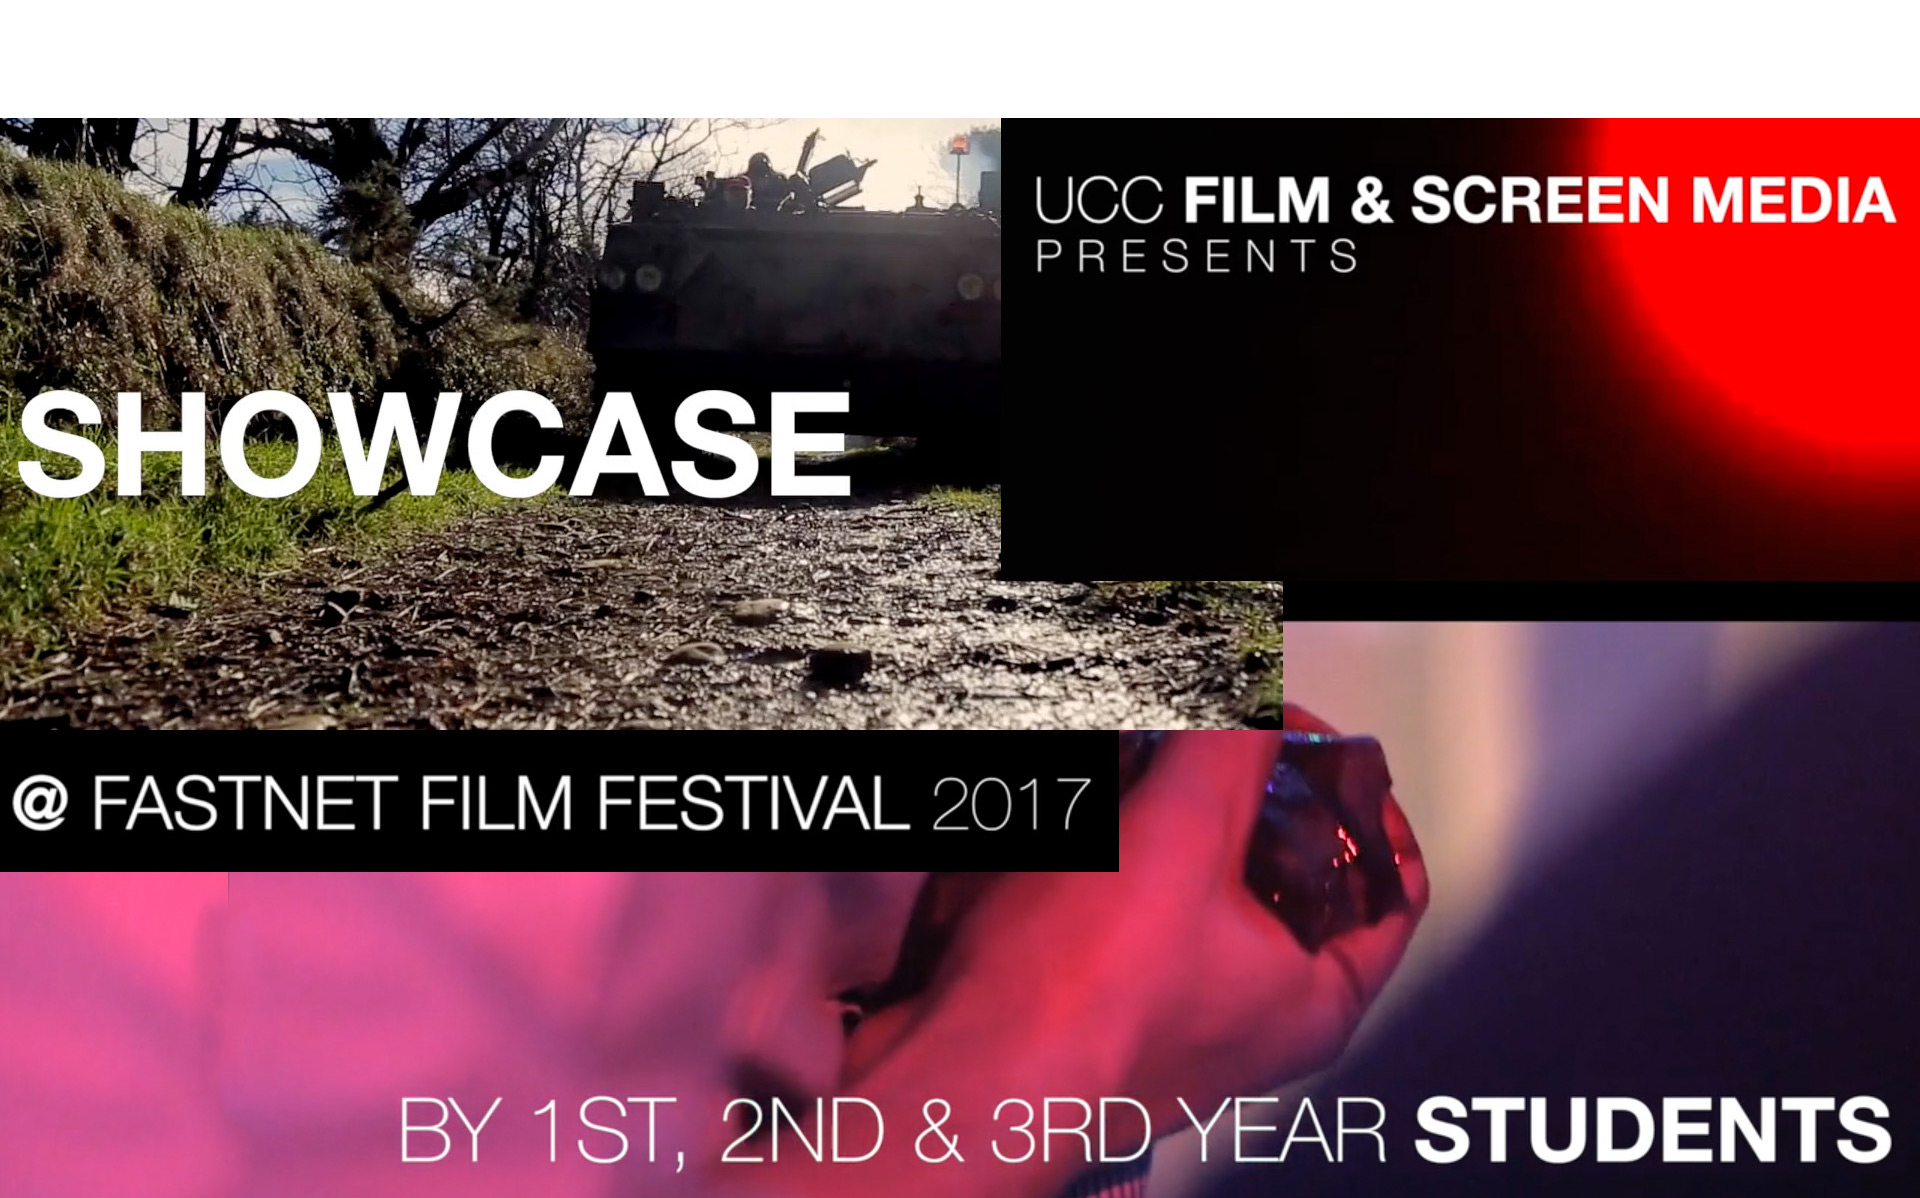 UCC Film and Screen Media Student's Showcase Event, Fastnet Film Festival, Saturday 27th May 12pm, Village Hall, Schull.